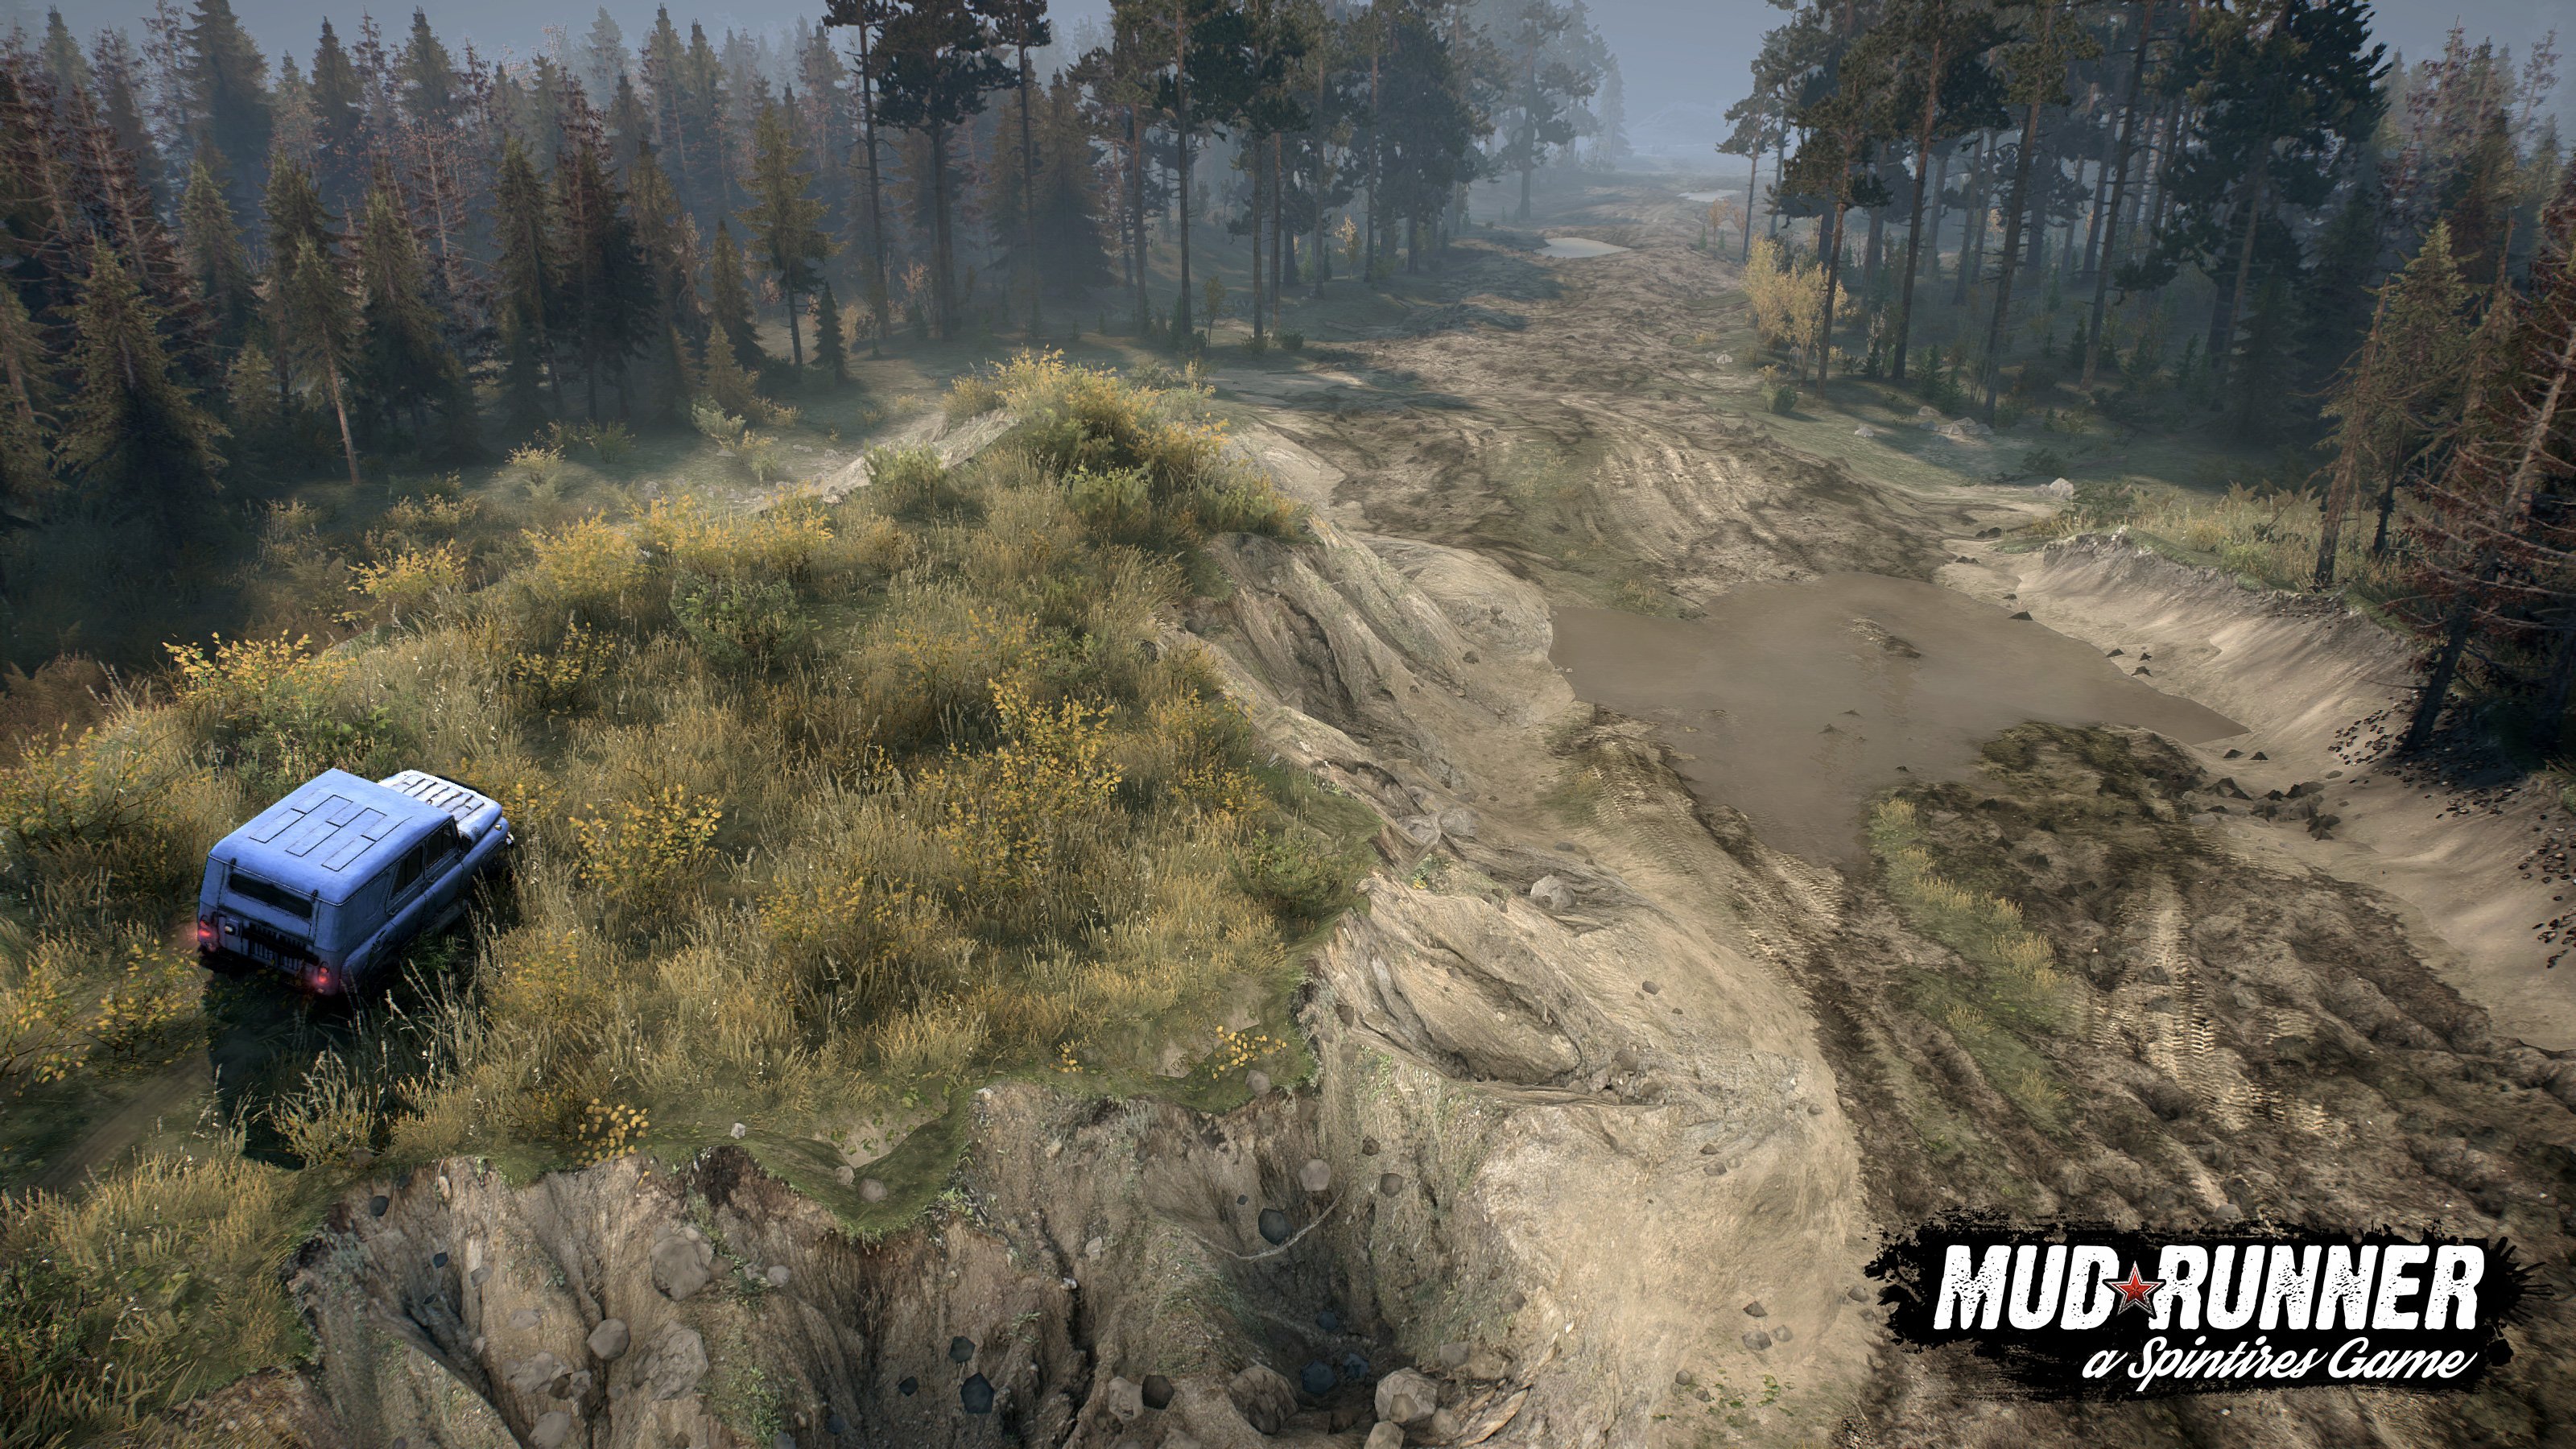 Expeditions a mudrunner game сохранения. SPINTIRES: MUDRUNNER. SPINTIRES Mud Runner игра. Игра SPINTIRES MUDRUNNER 2. Mud Runner 2023.